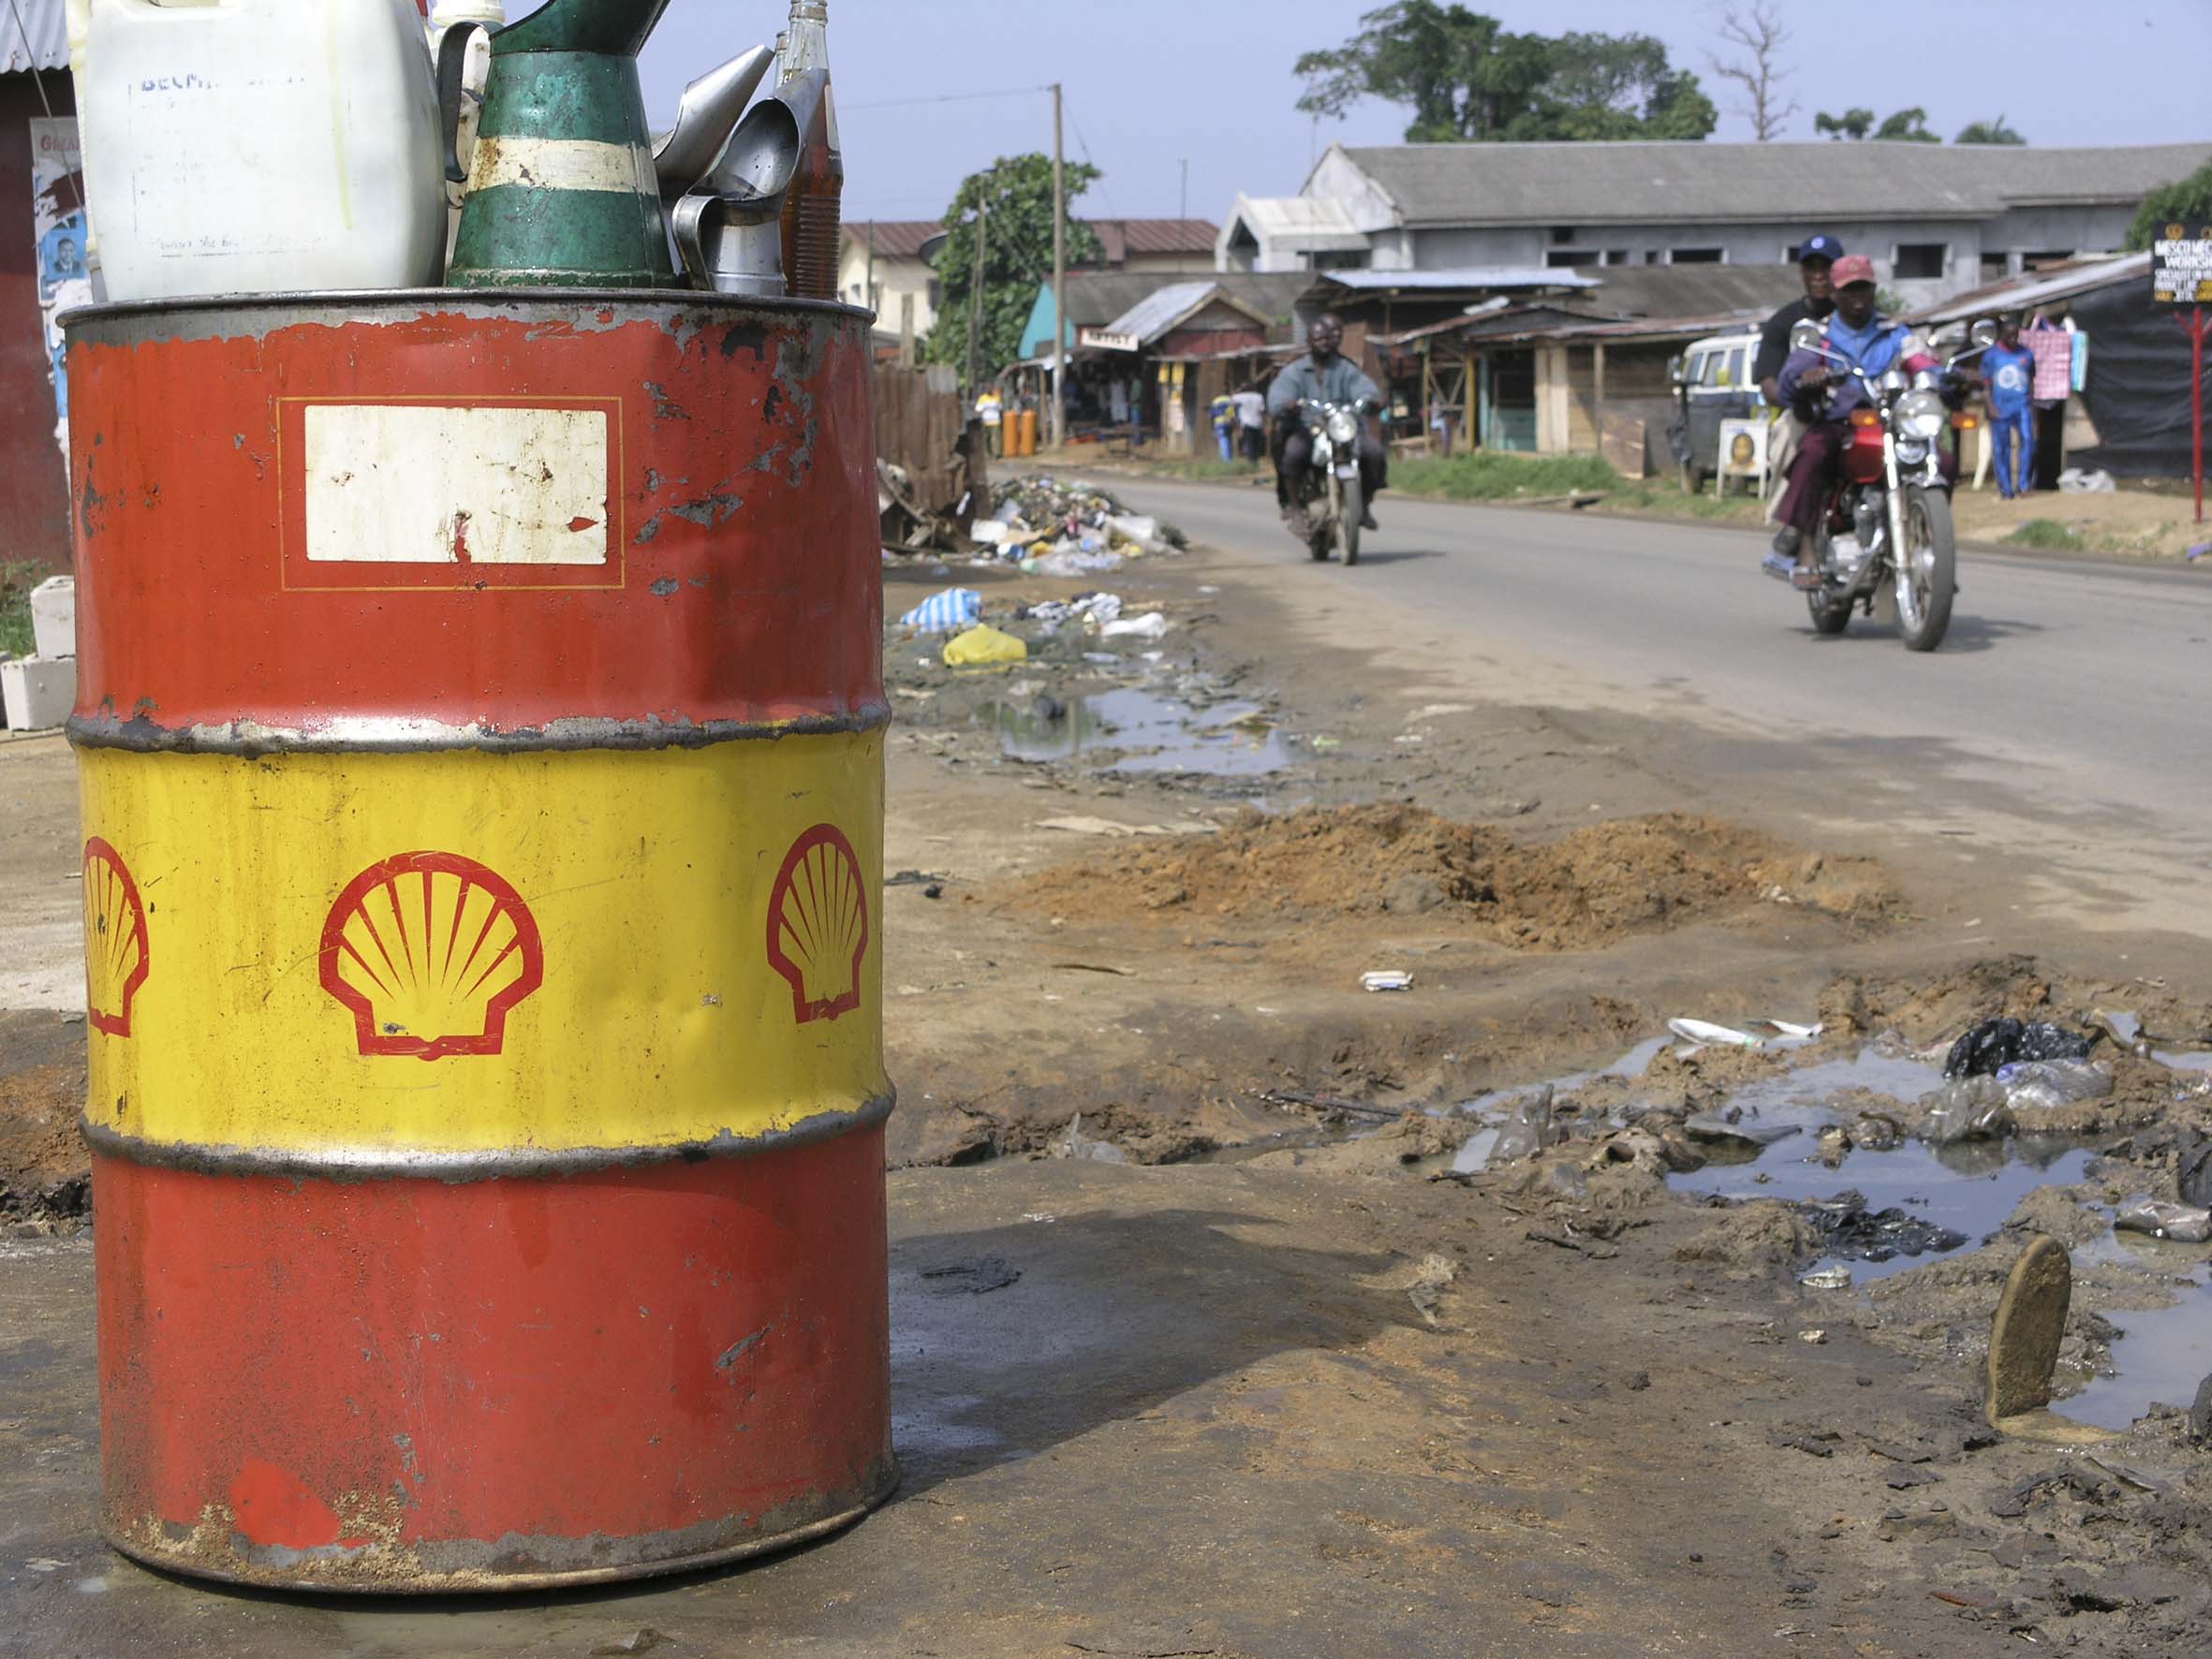 shell nigeria oil spill case study geography